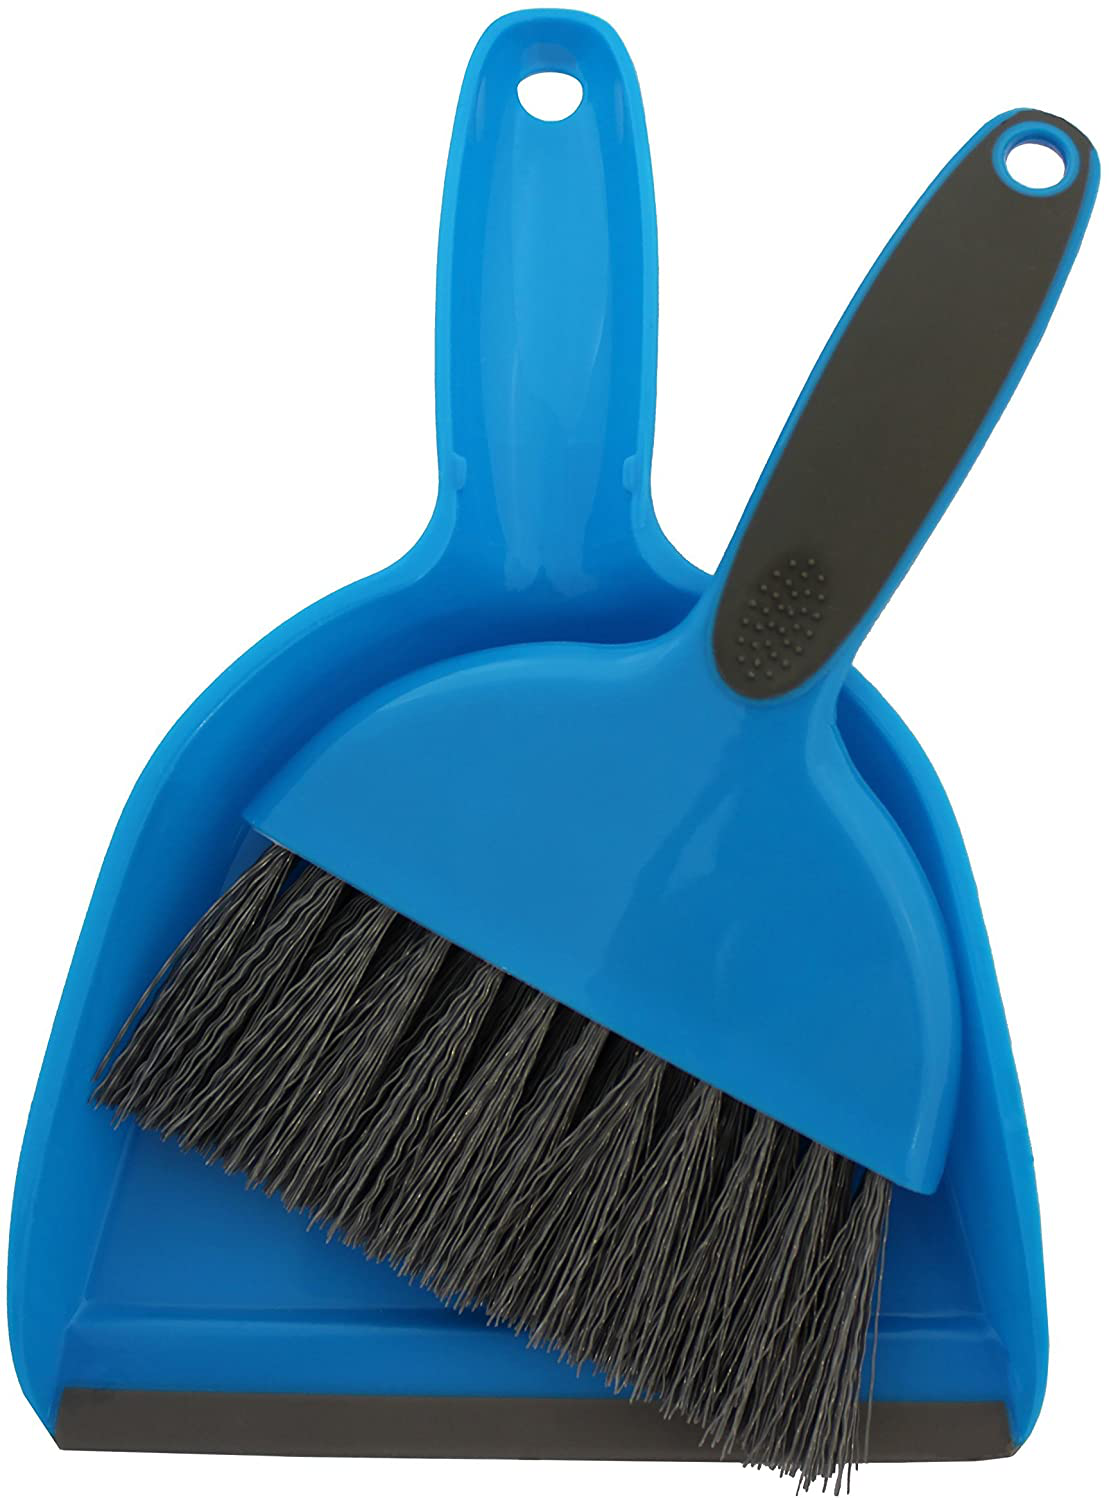 Cage Cleaner for Guinea Pigs, Cats, Hedgehogs, Hamsters, Chinchillas, Rabbits, Reptiles, and Other Small Animals - Cleaning Tool Set for Animal Waste - Mini Dustpan and Brush Set (1 Pack)